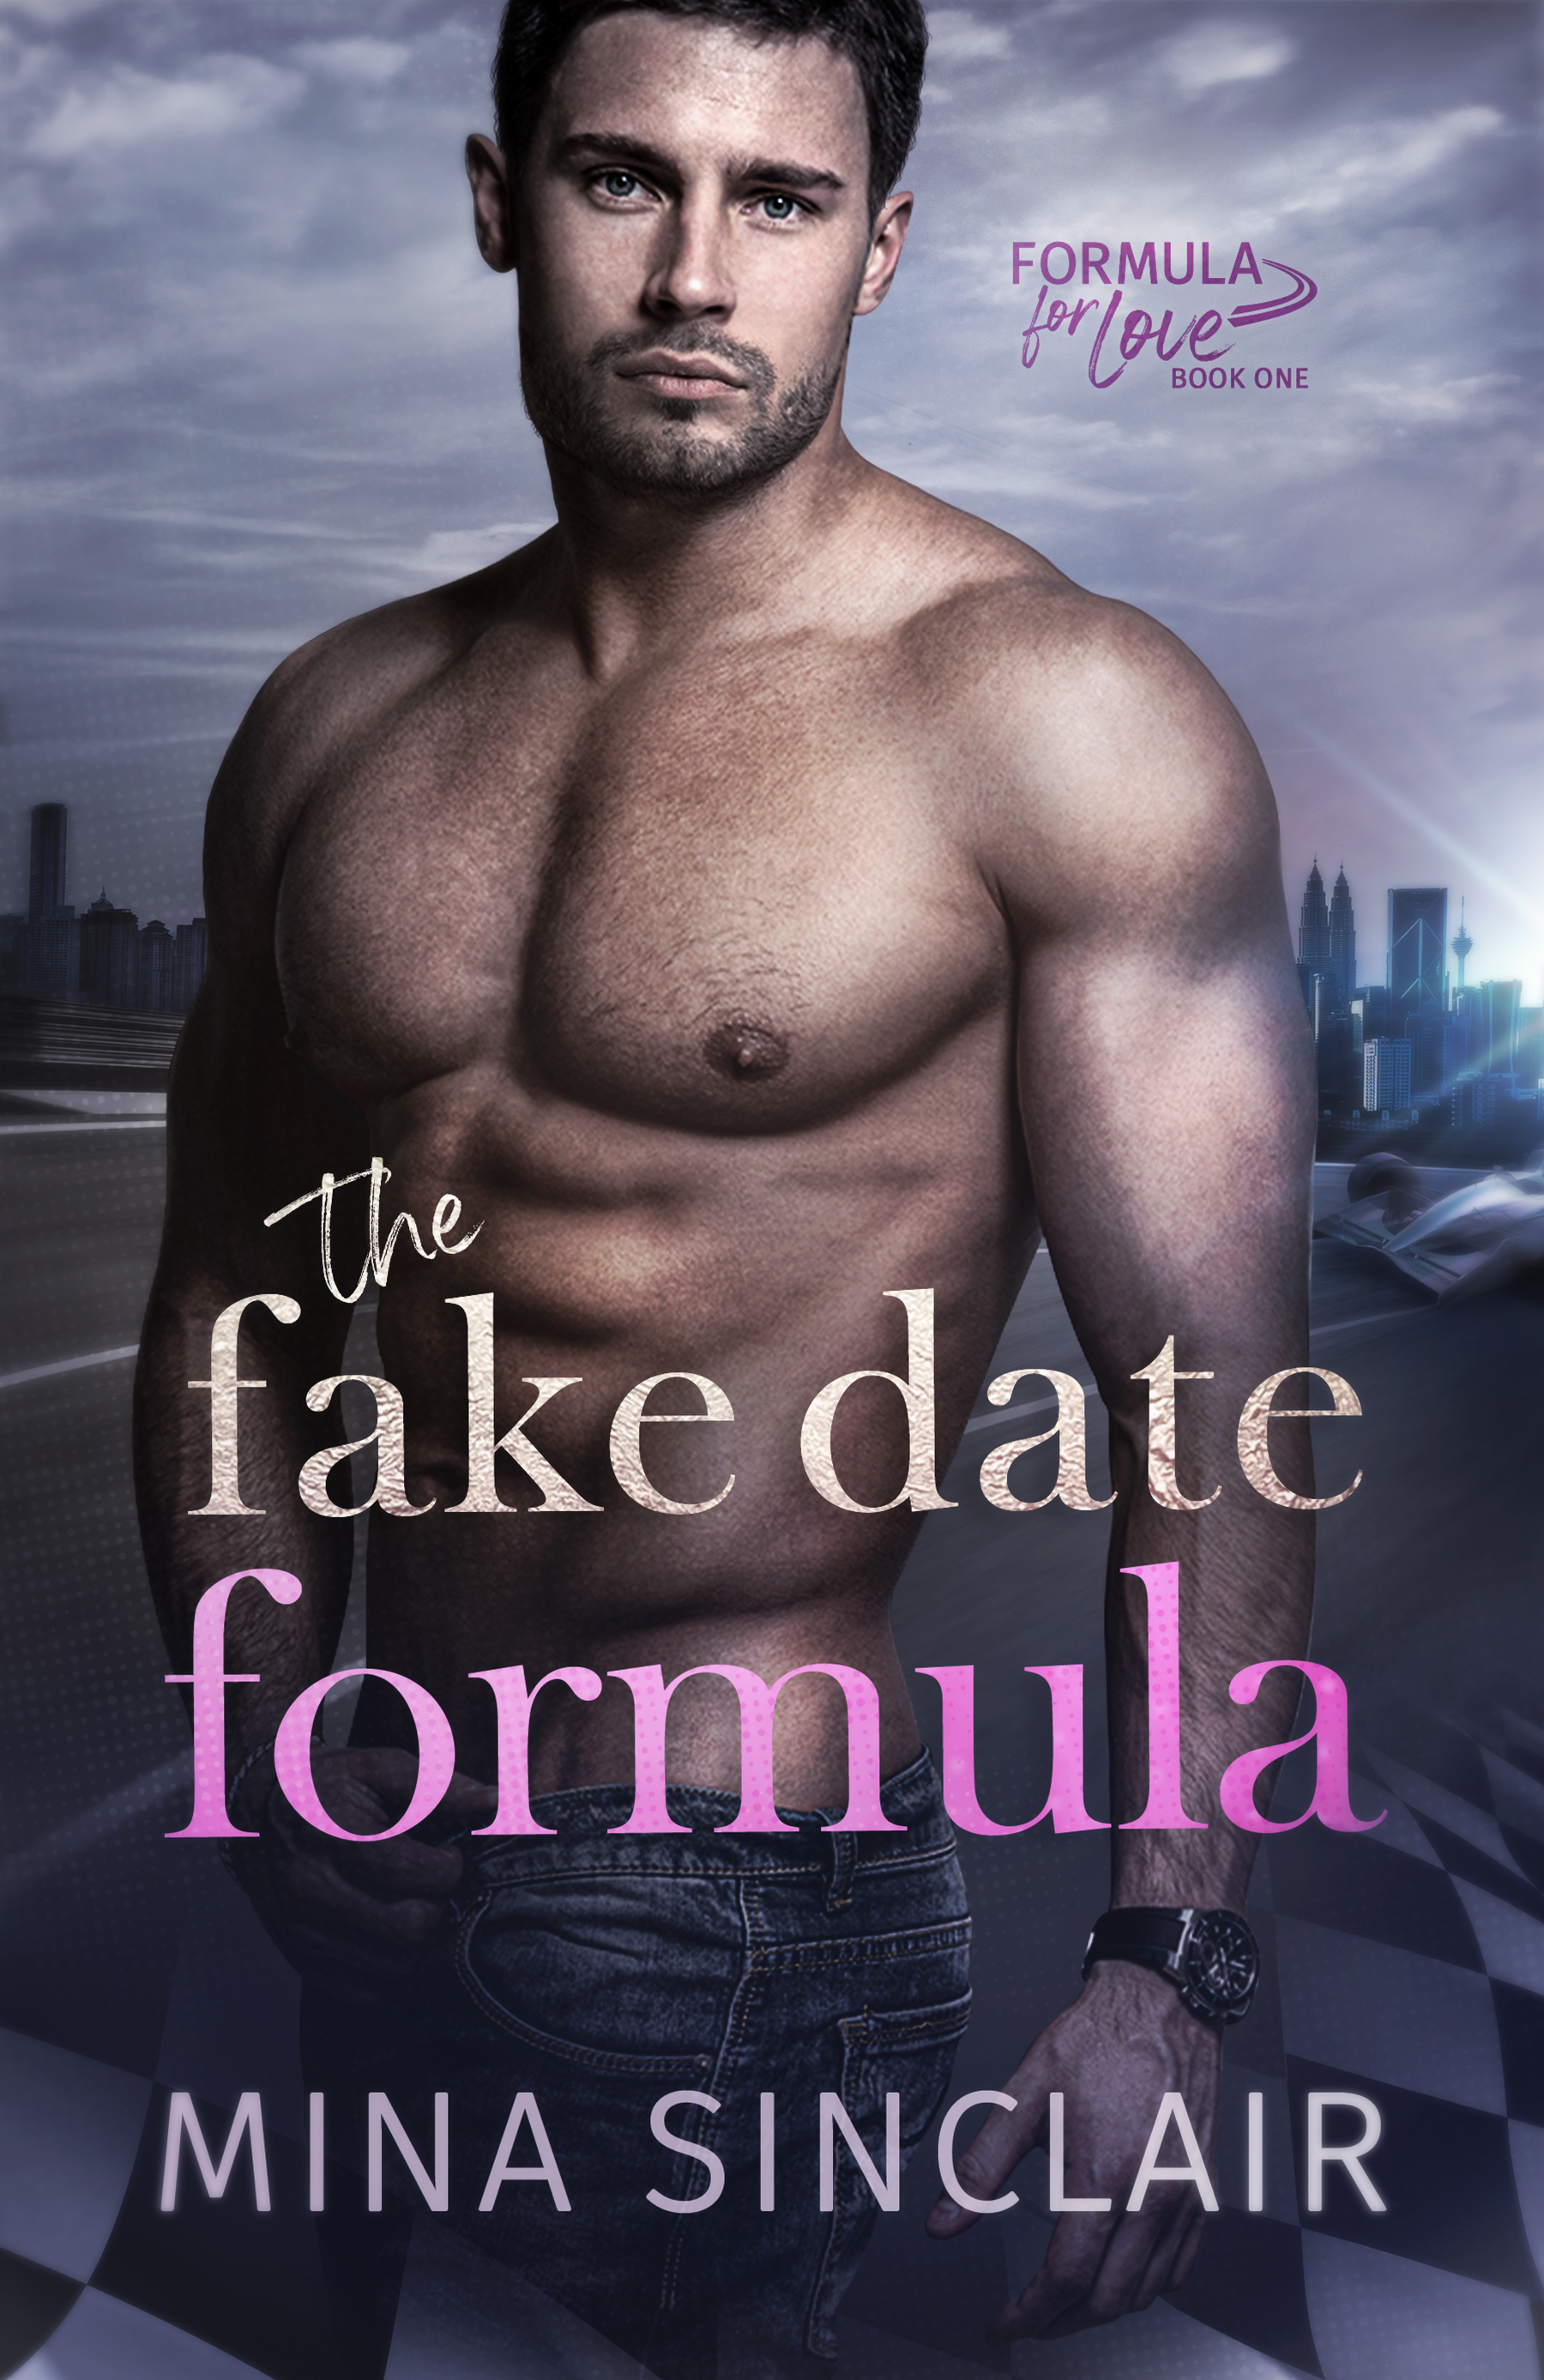 The Fake Date Formula by Mina Sinclair